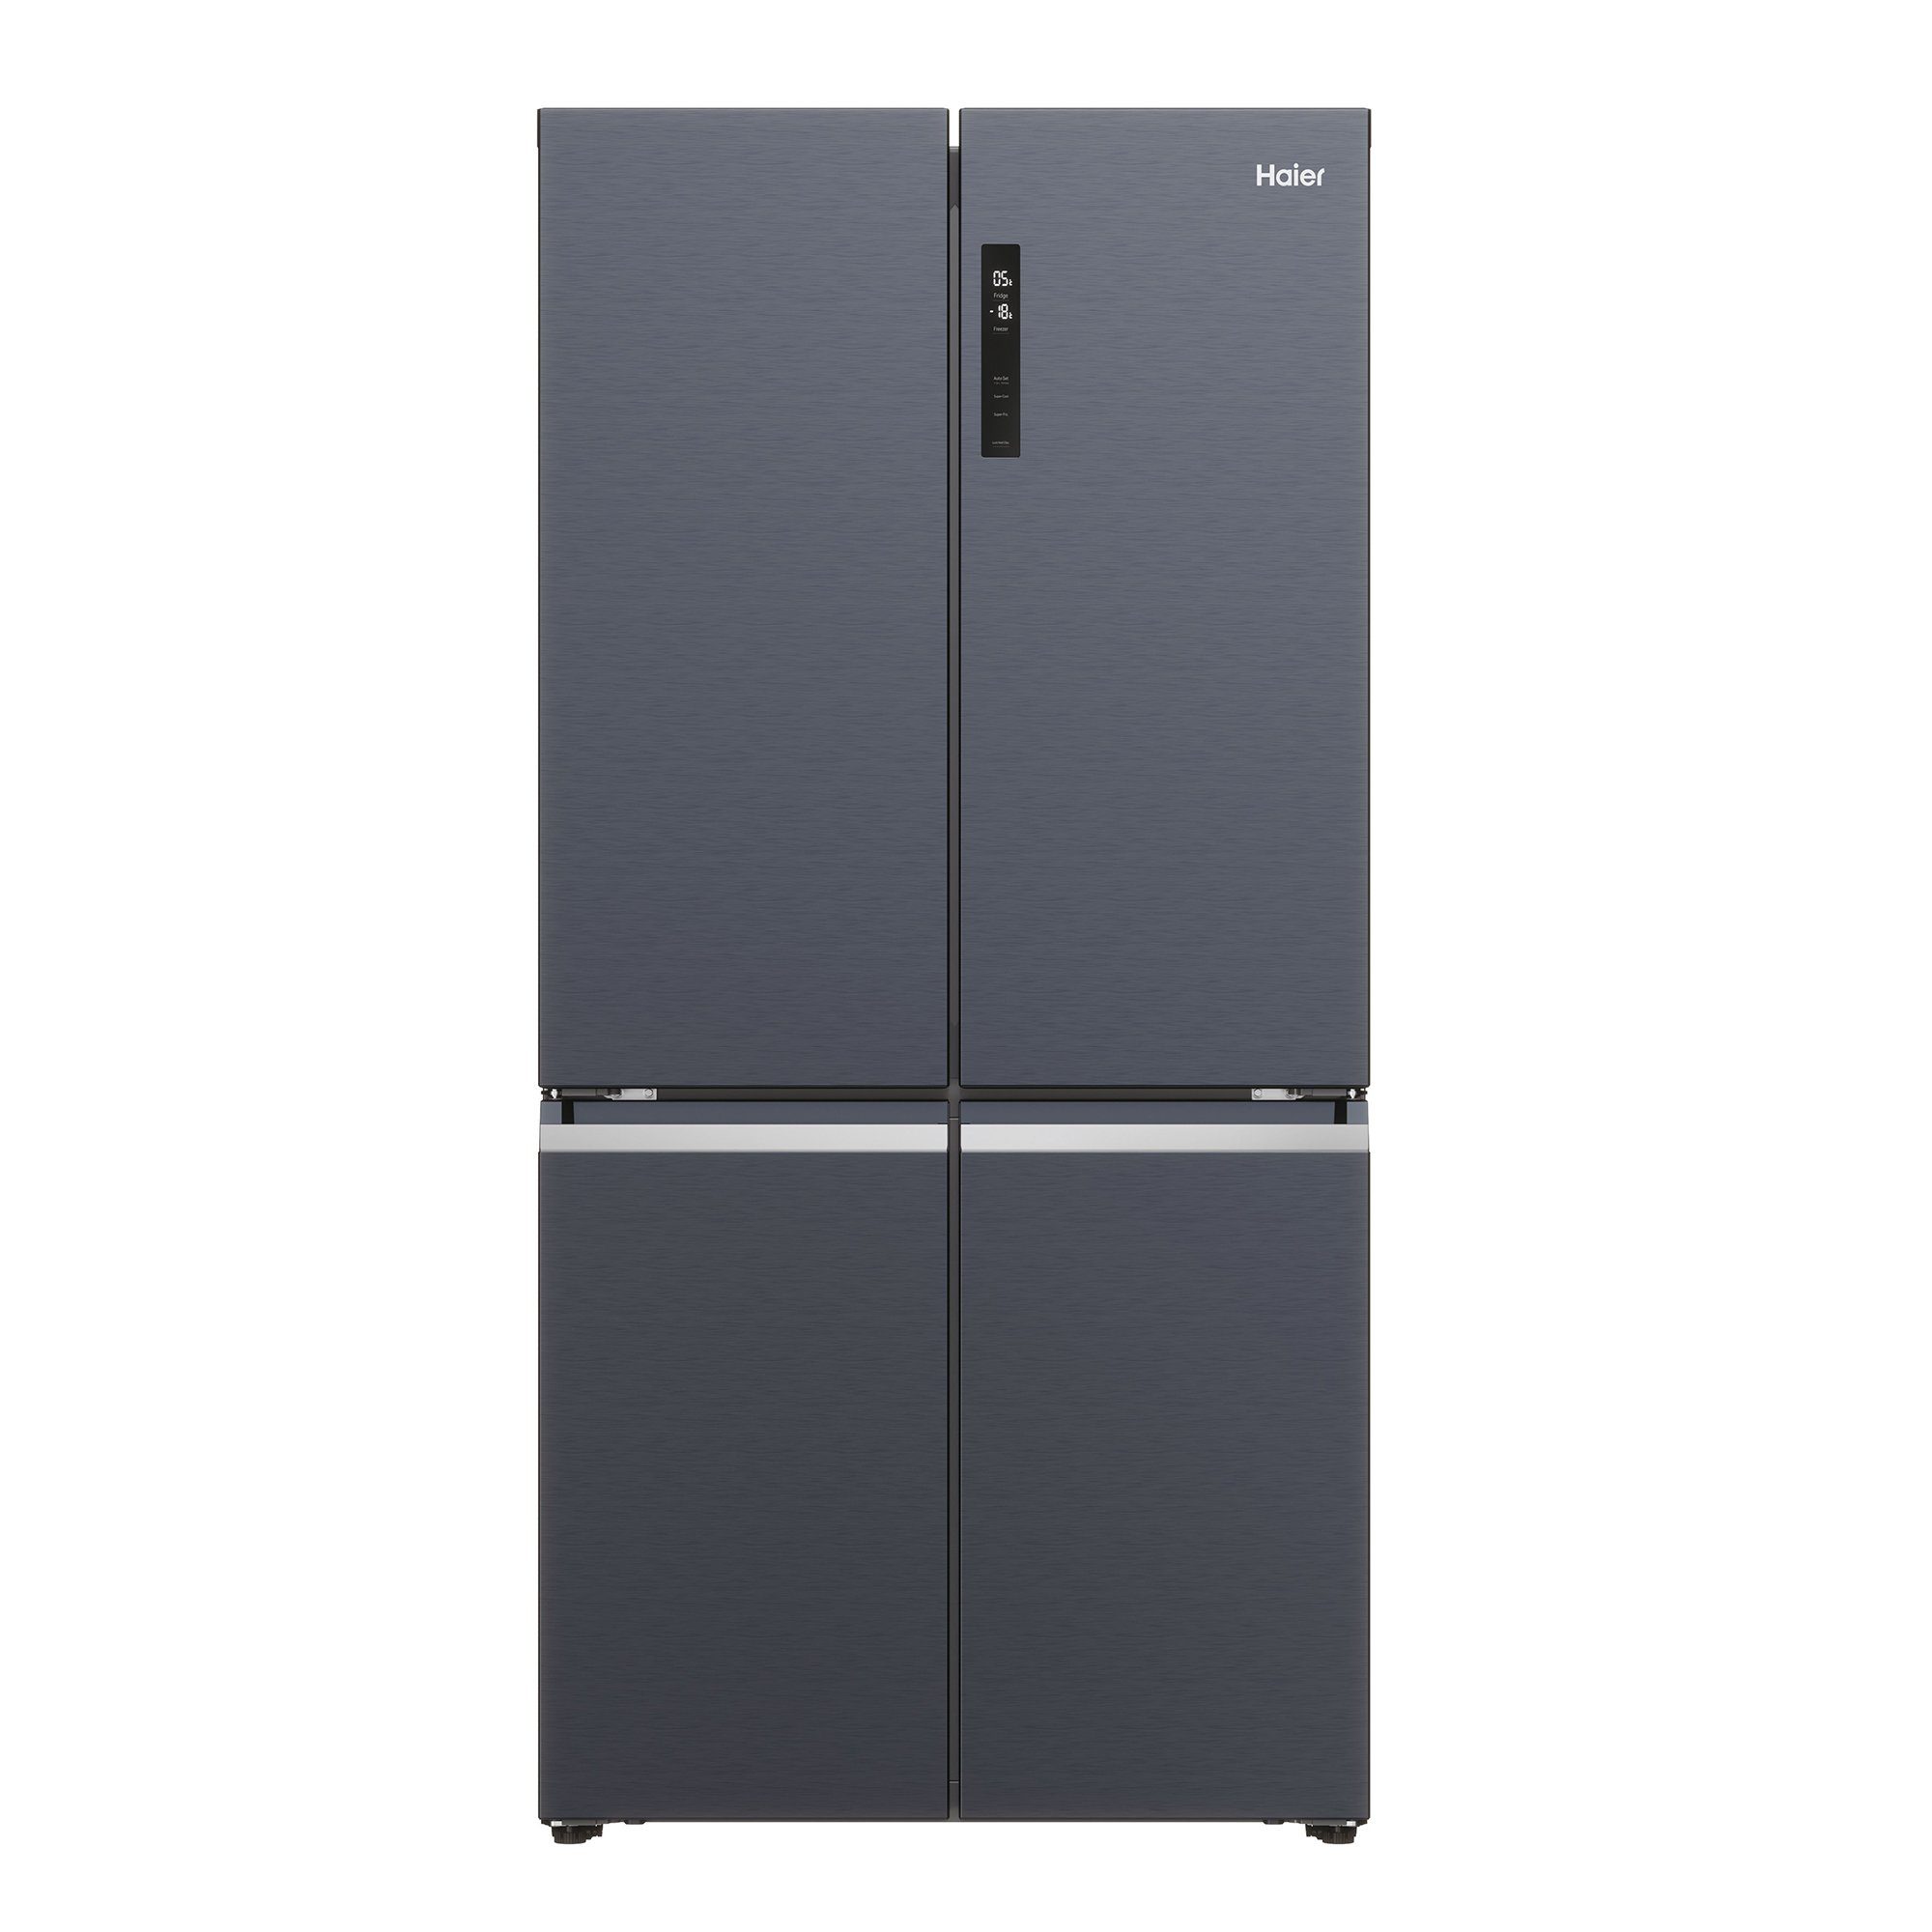 Haier French CUBE breit, hoch, No 190 cm cm 5 MyZone, 90.5 Frost, Modus, Total 90 Flow Holiday HCR5919ENMB, Air SERIES Multi Door